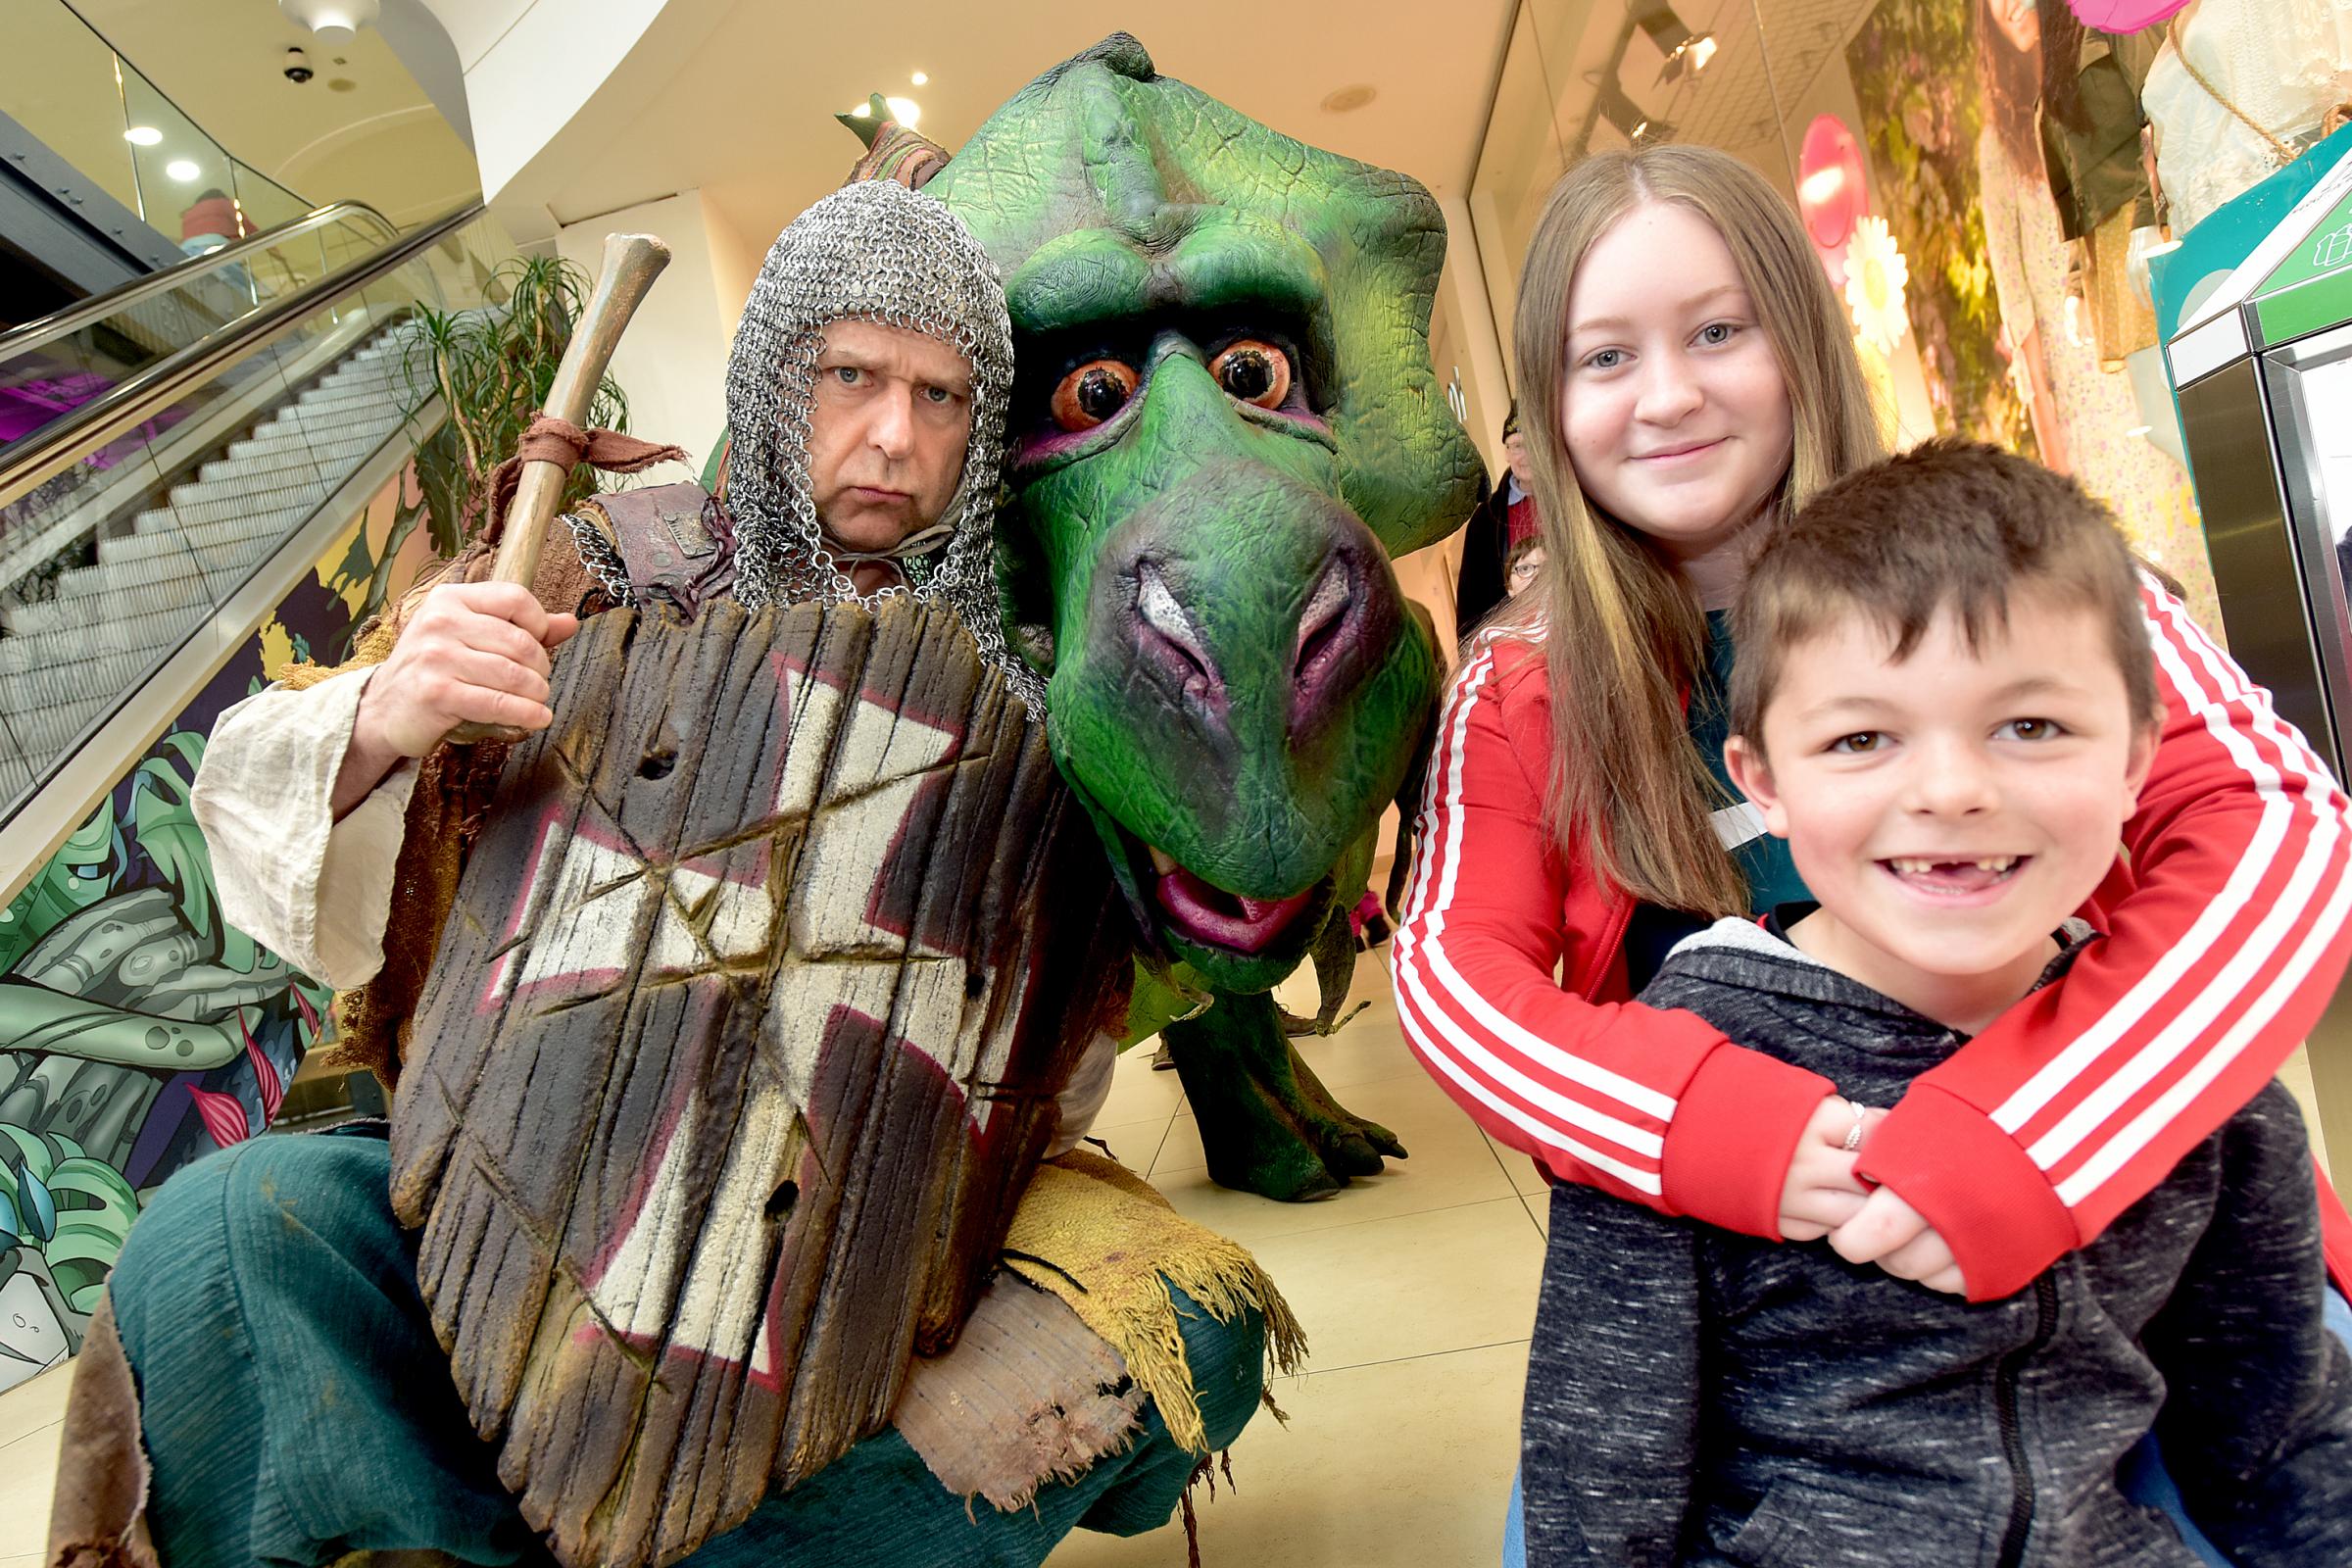 Fire-breathing animatronic dragon delights children at shopping centre